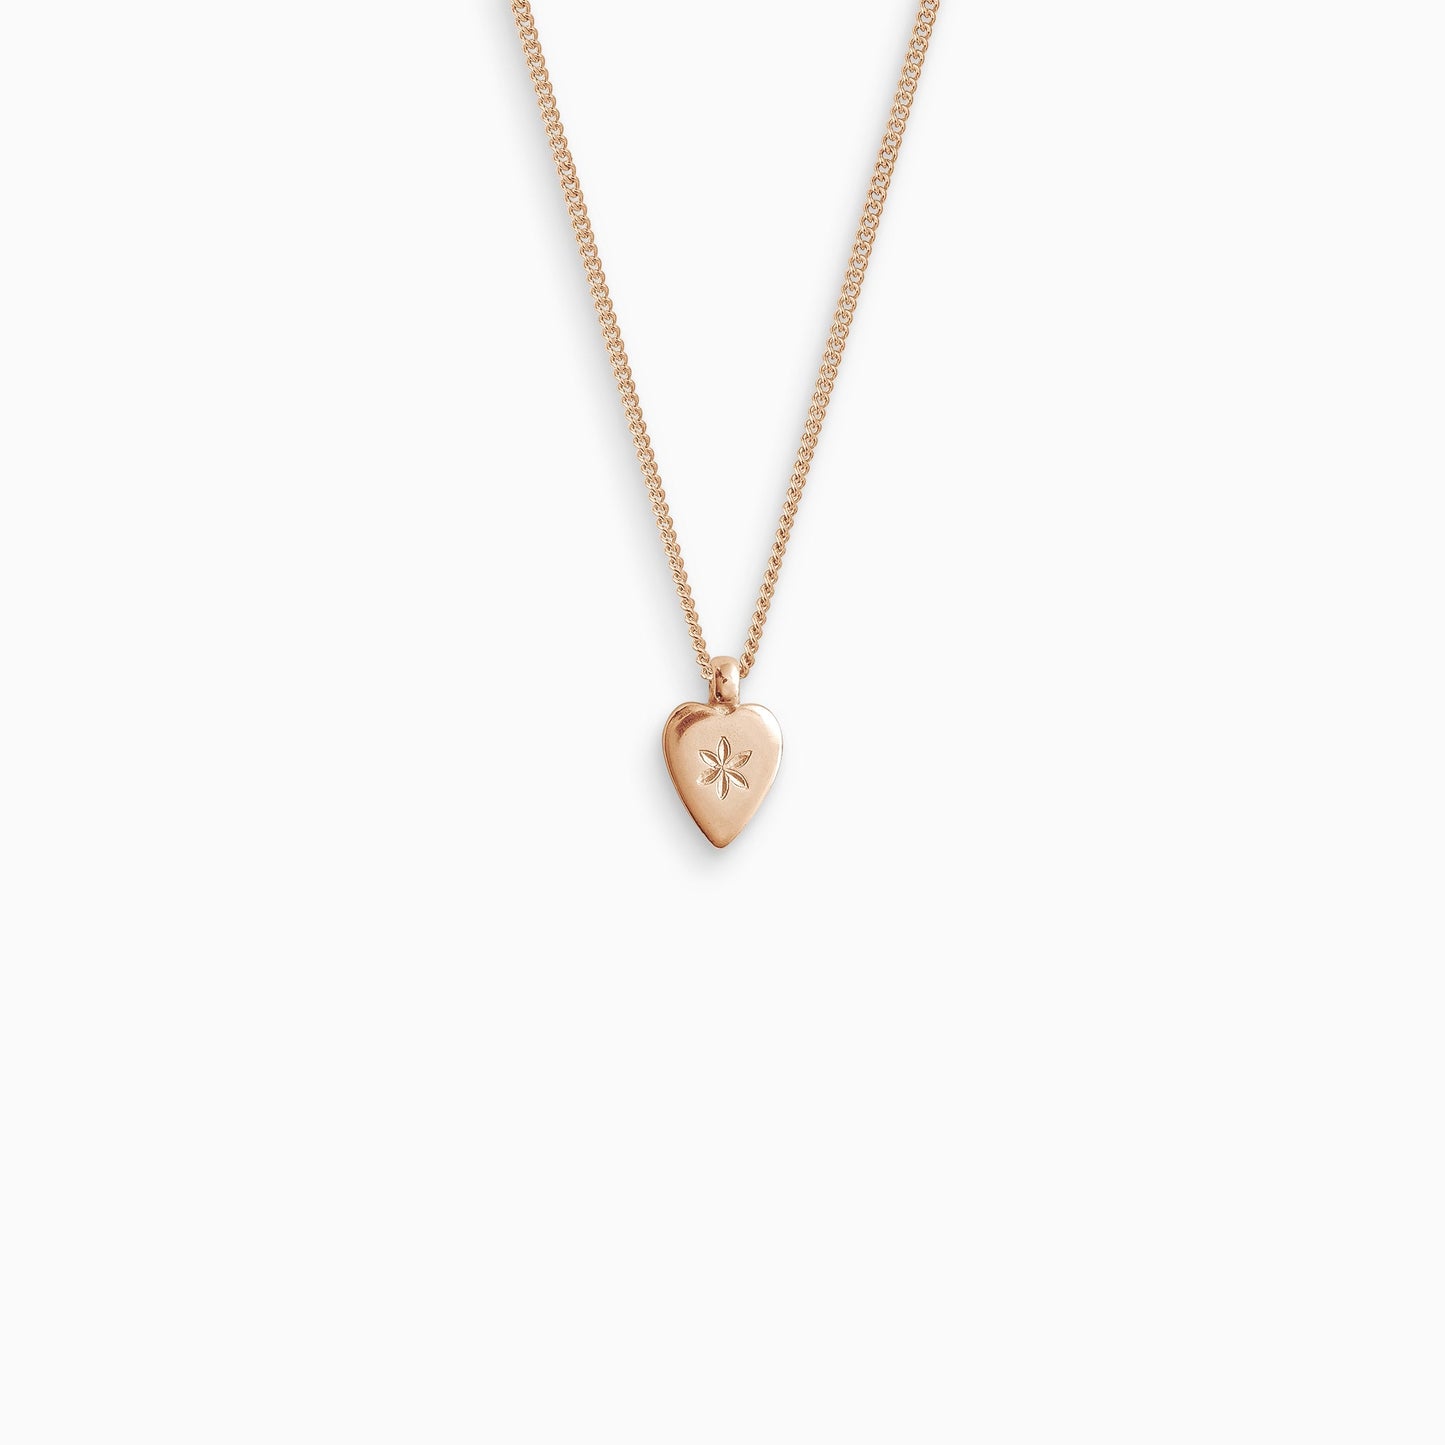 Flower Heart charm necklace